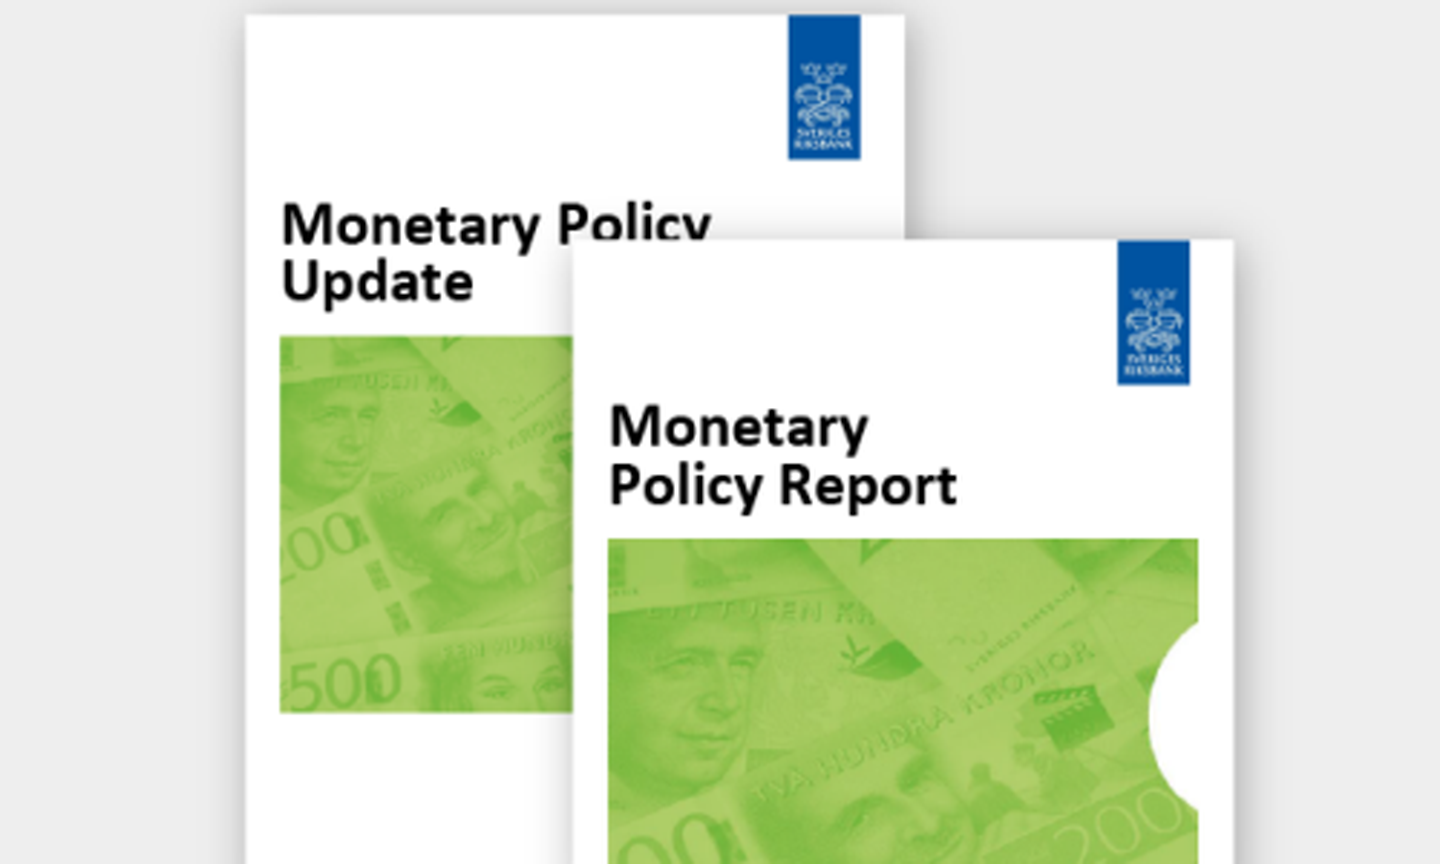 Cover Monetary Policy report and update